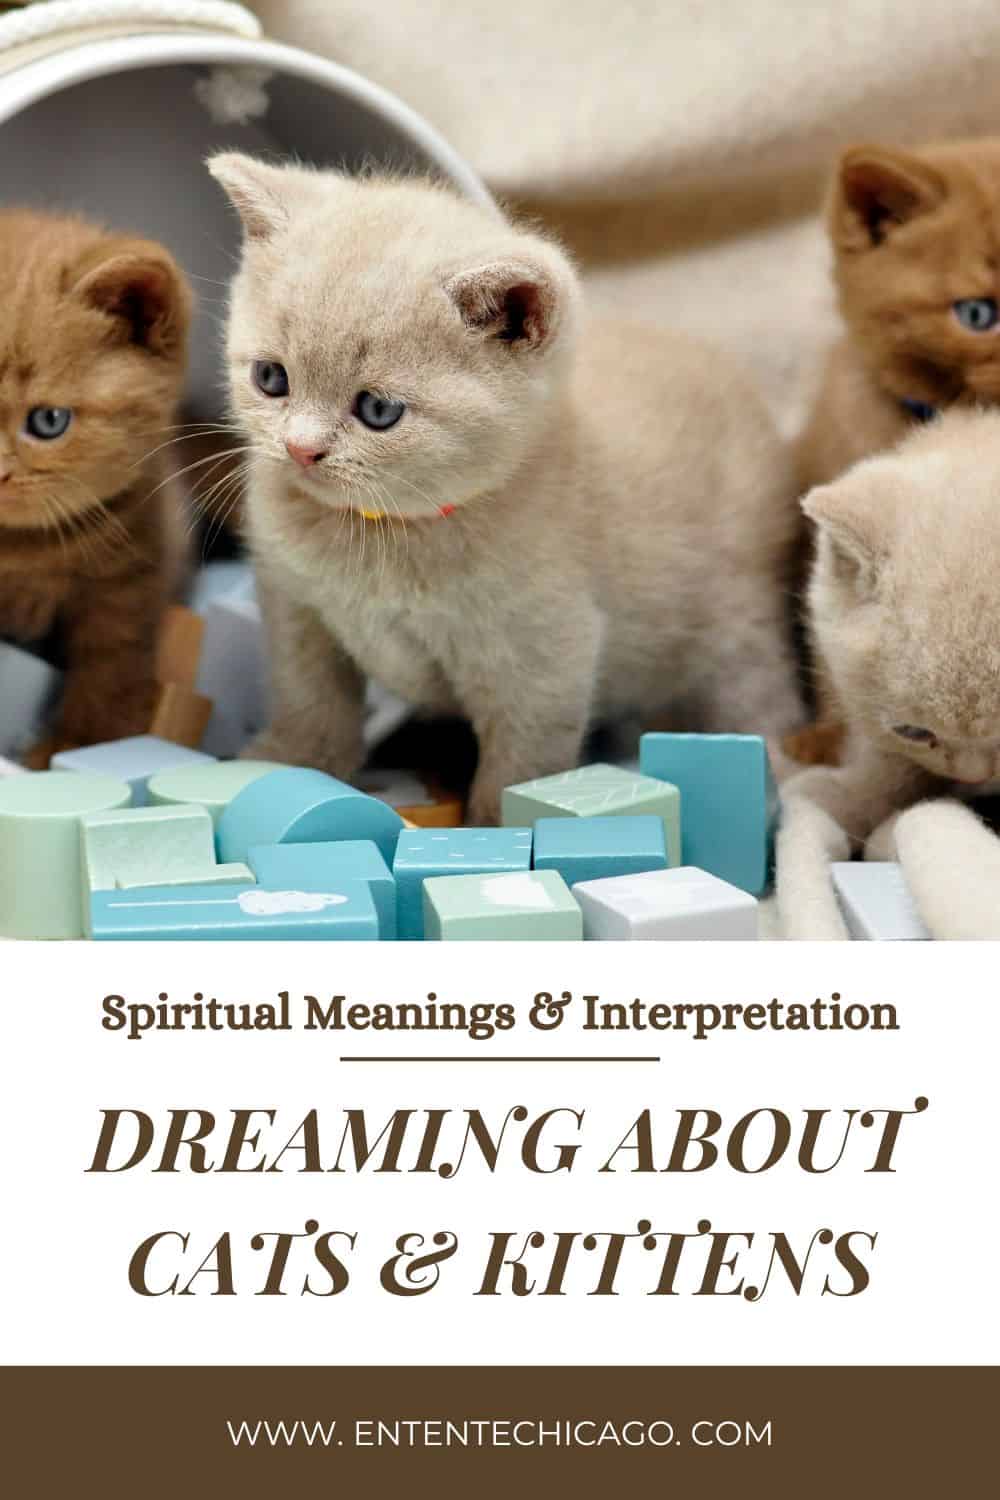 Dreaming About Cats and Kittens (Spiritual Meanings & Interpretation)